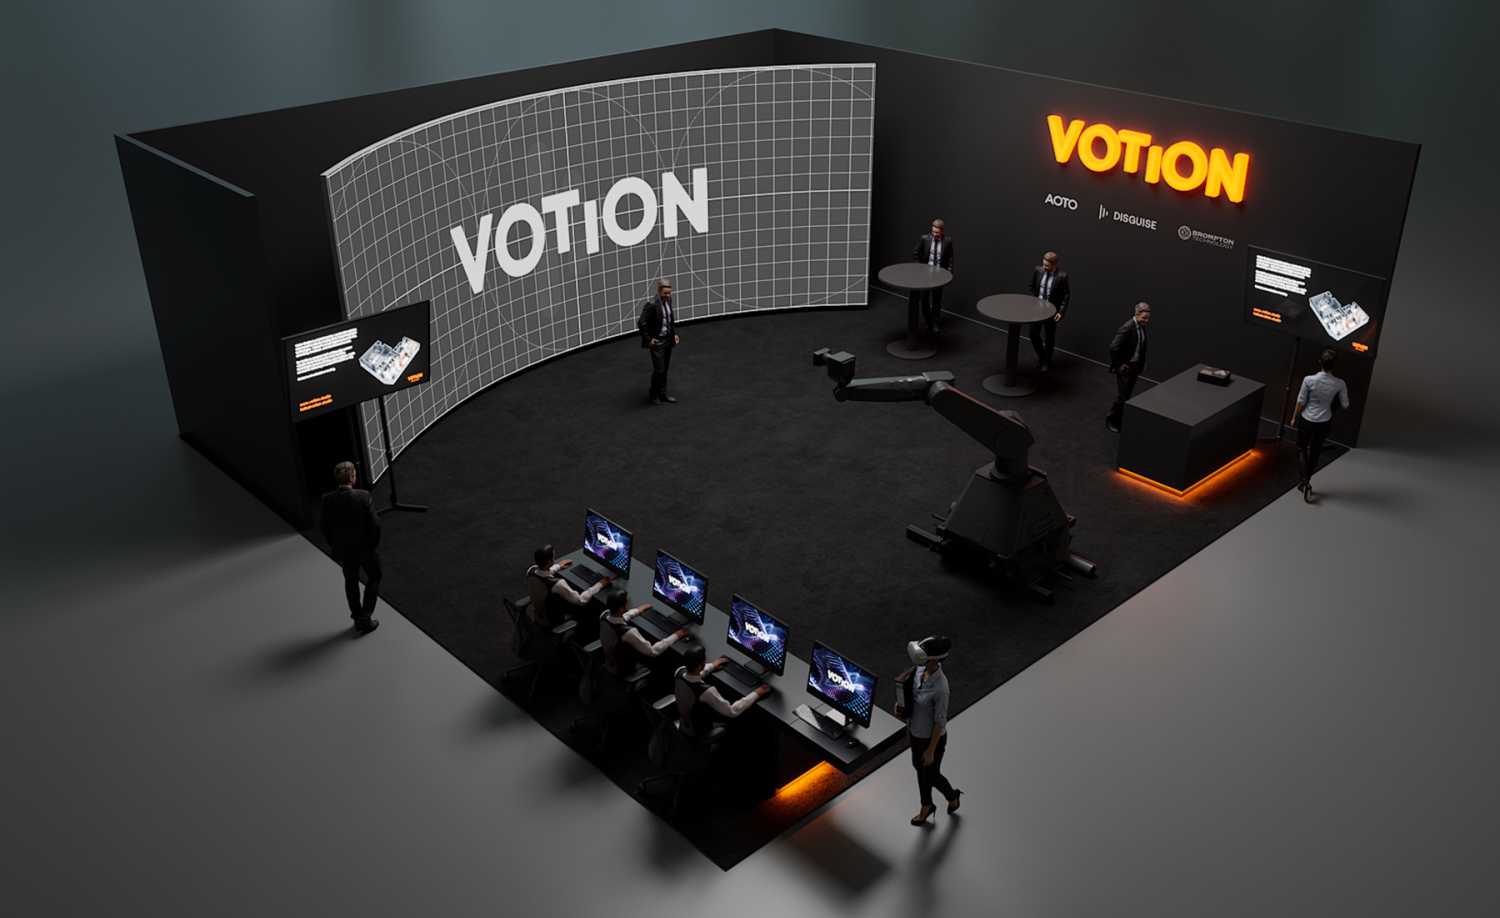 Brompton Technology will co-exhibit with creative studio partner, Votion Studios, alongside AOTO and Disguise